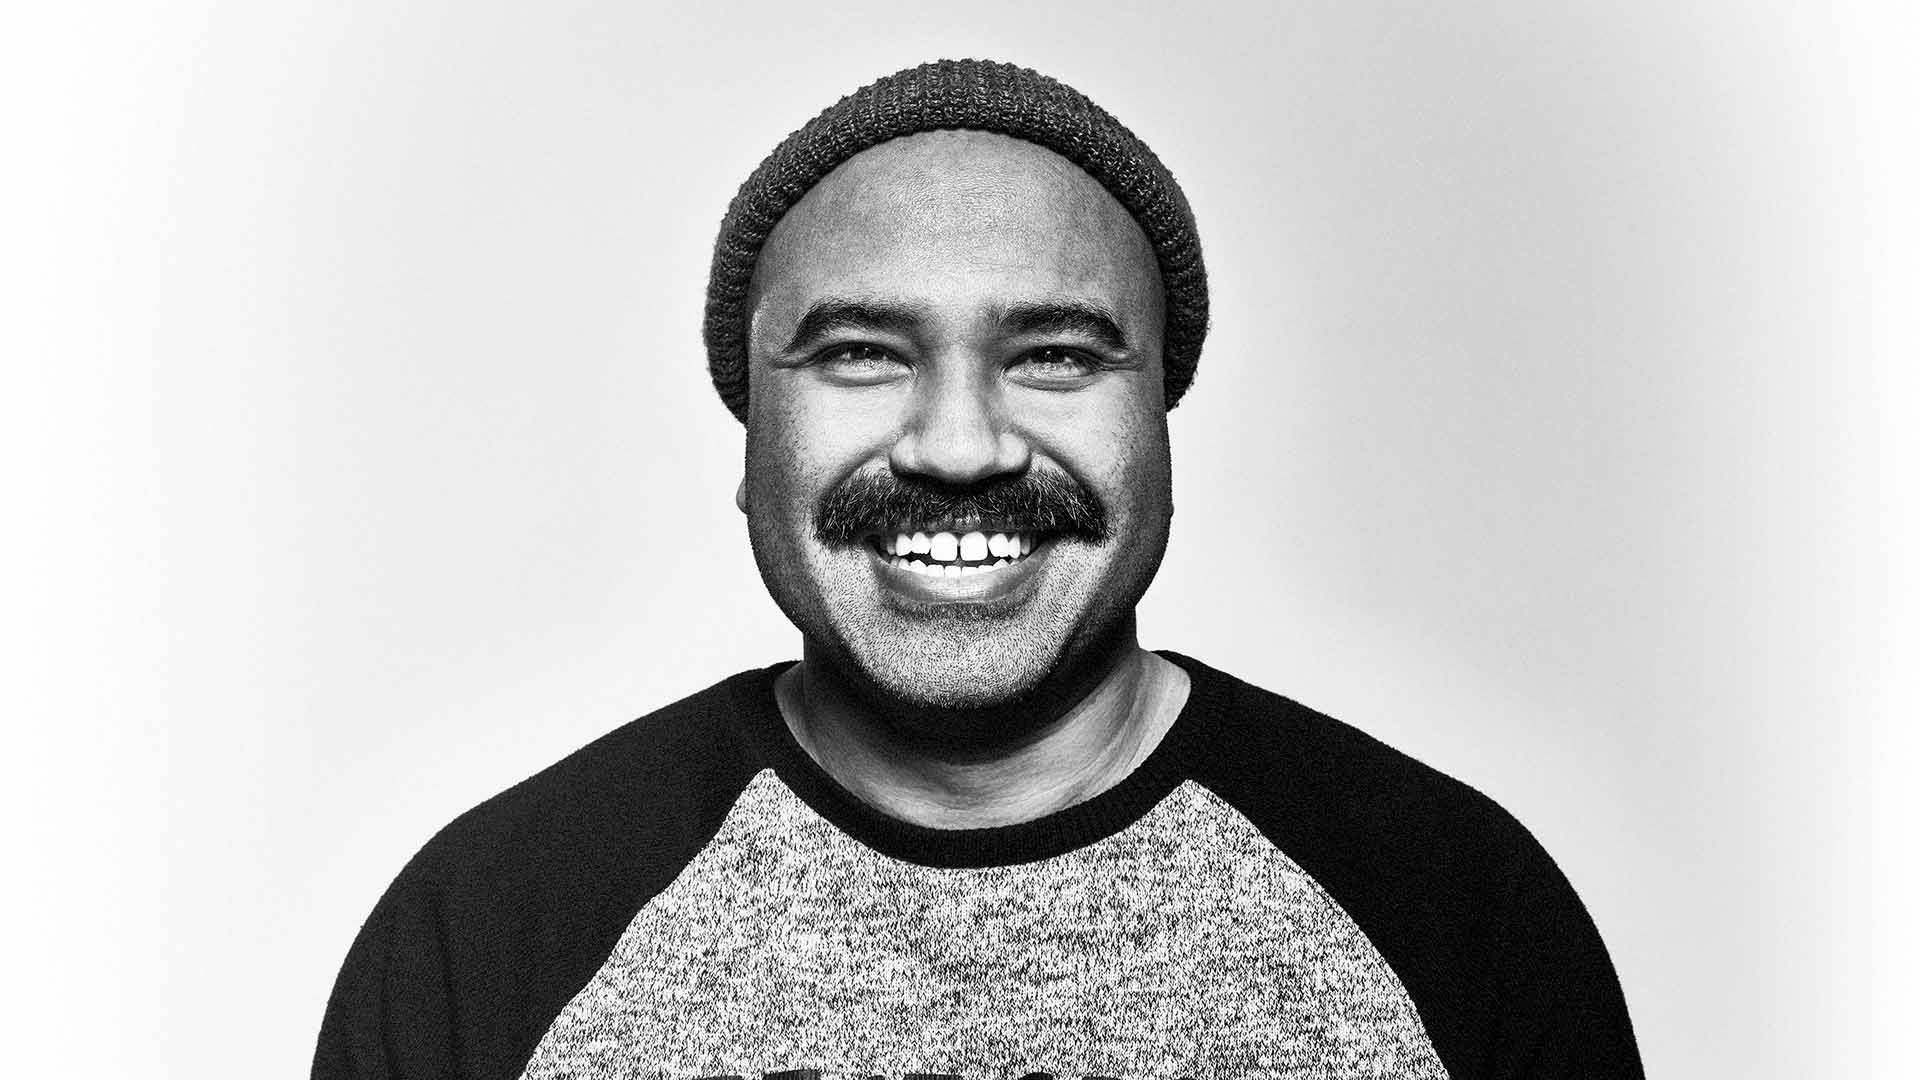 Man with moustache smiling to camera.